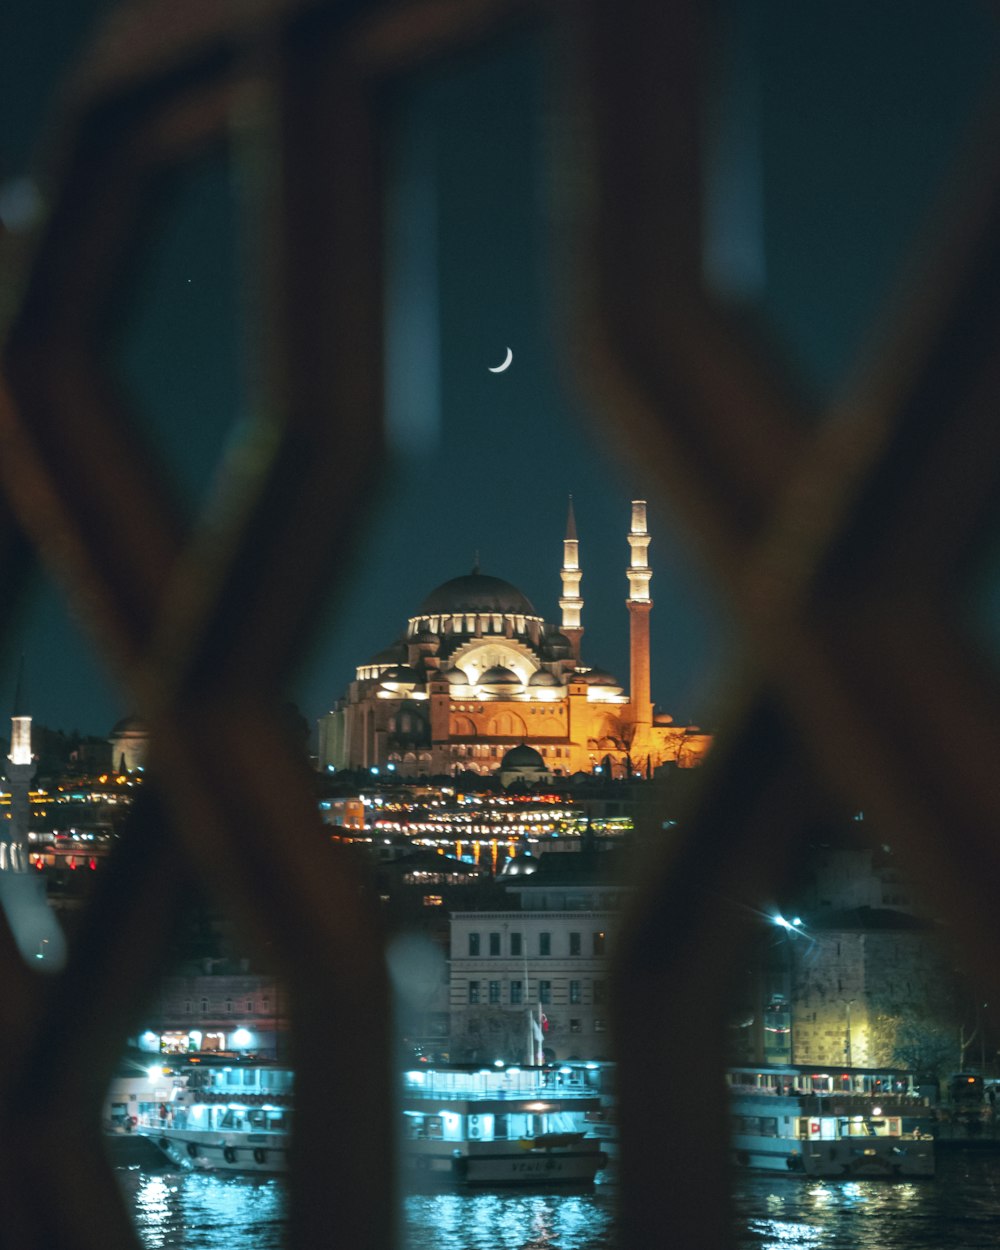 a view of a city at night through a fence